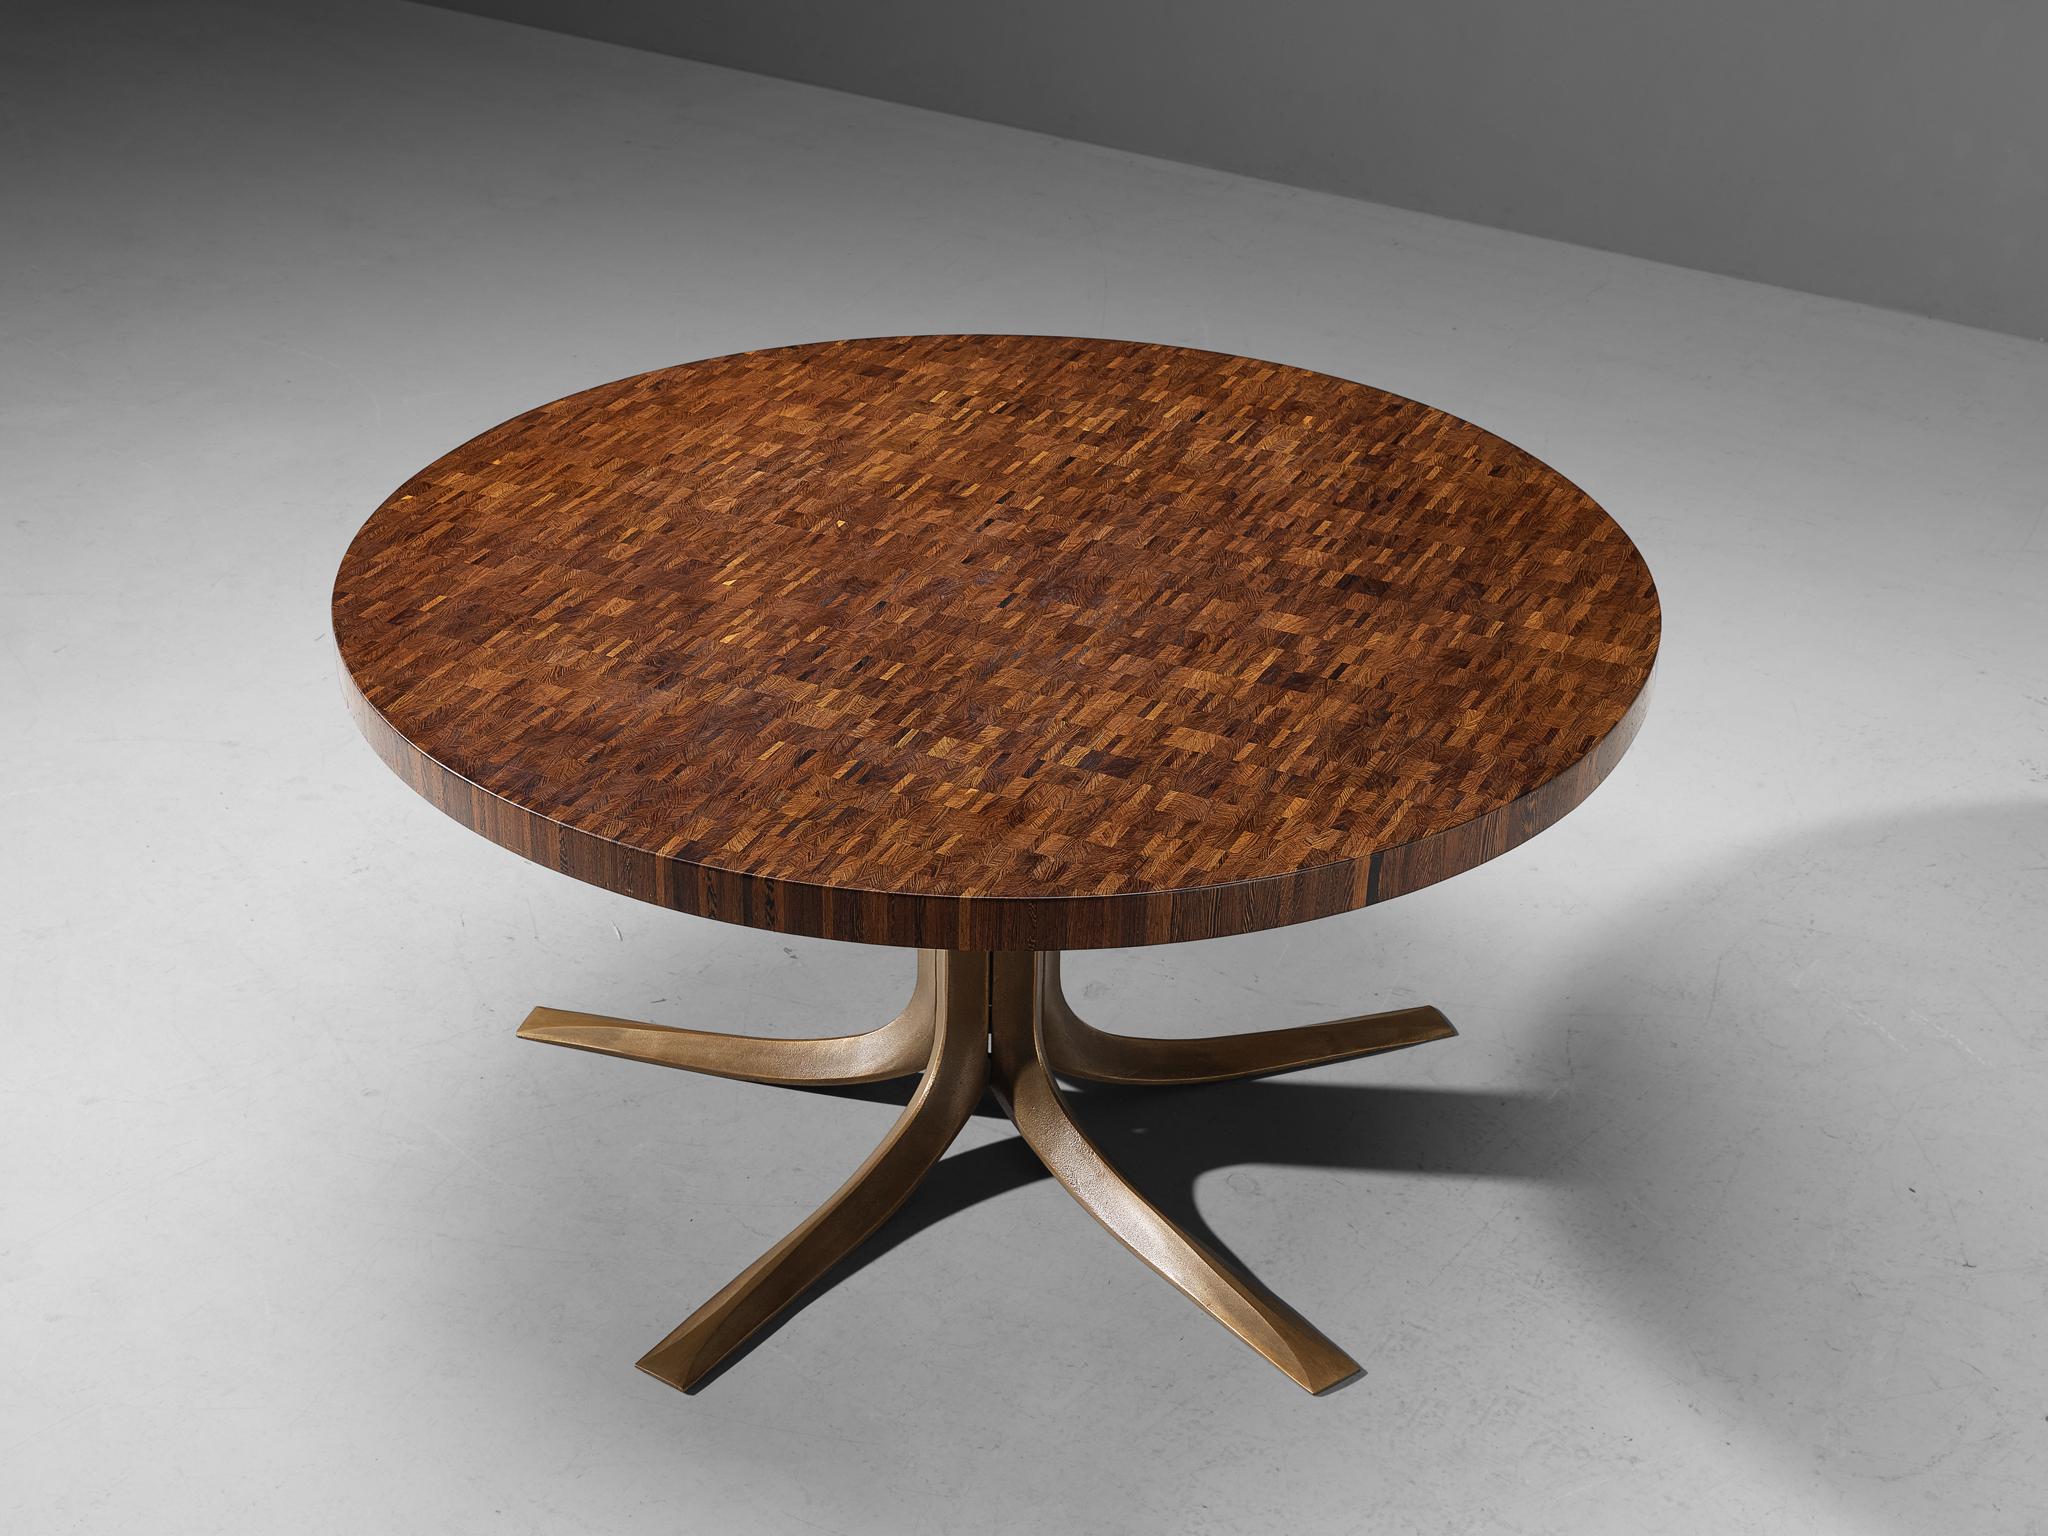 Jules Wabbes, dining table or center table, bronze, end-grain wengé, Belgium, late 1960 

Jules Wabbes created an outstanding piece of furniture that deserves a prominent place in one's living room. The tabletop owns its intricate appearance due to